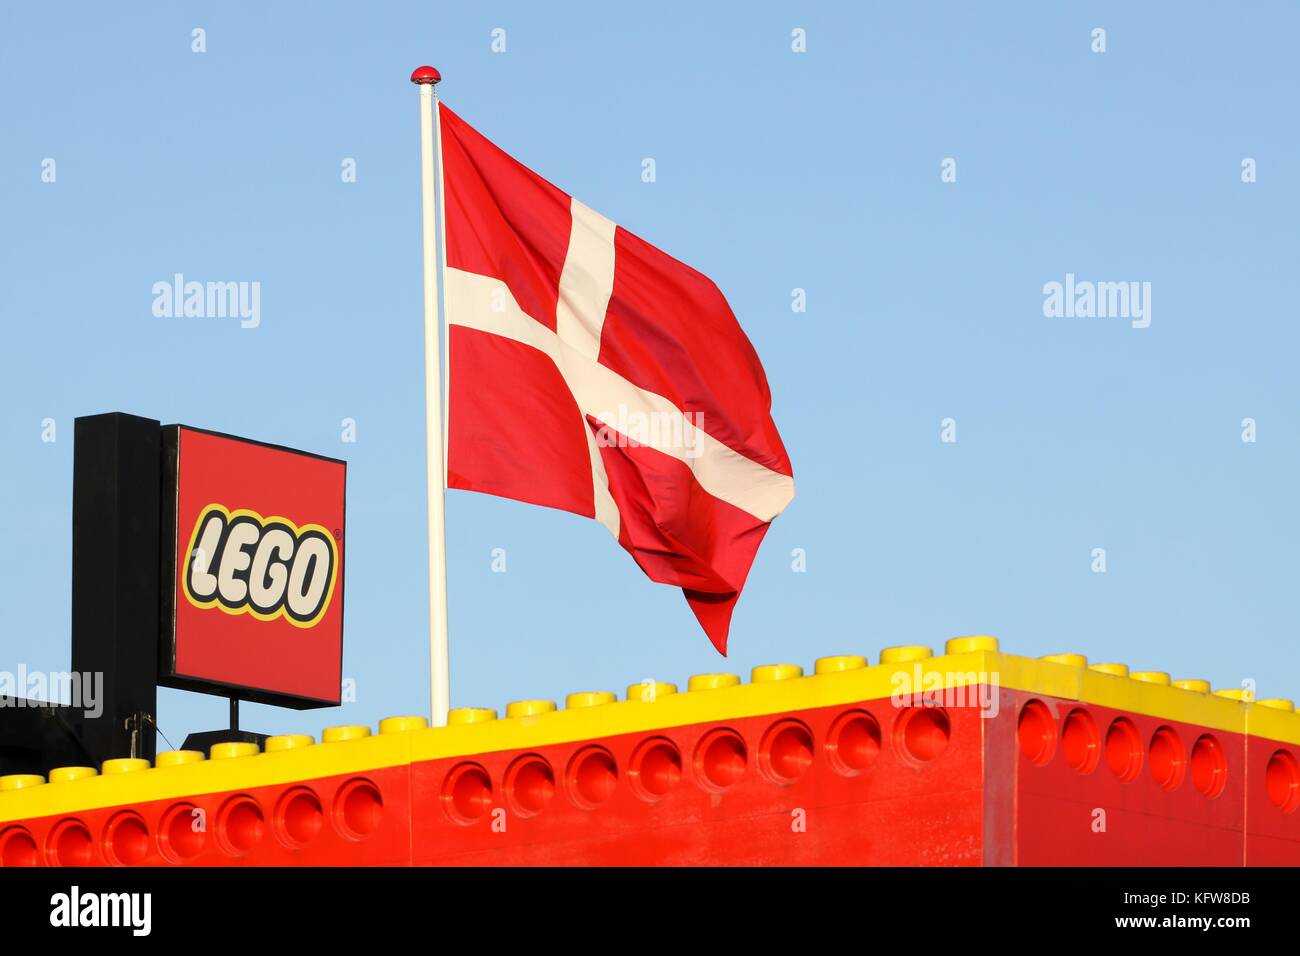 Billund, Denmark - November 12, 2015: Lego logo on a building. Lego is a line of plastic construction toys that are manufactured by the group Lego Stock Photo